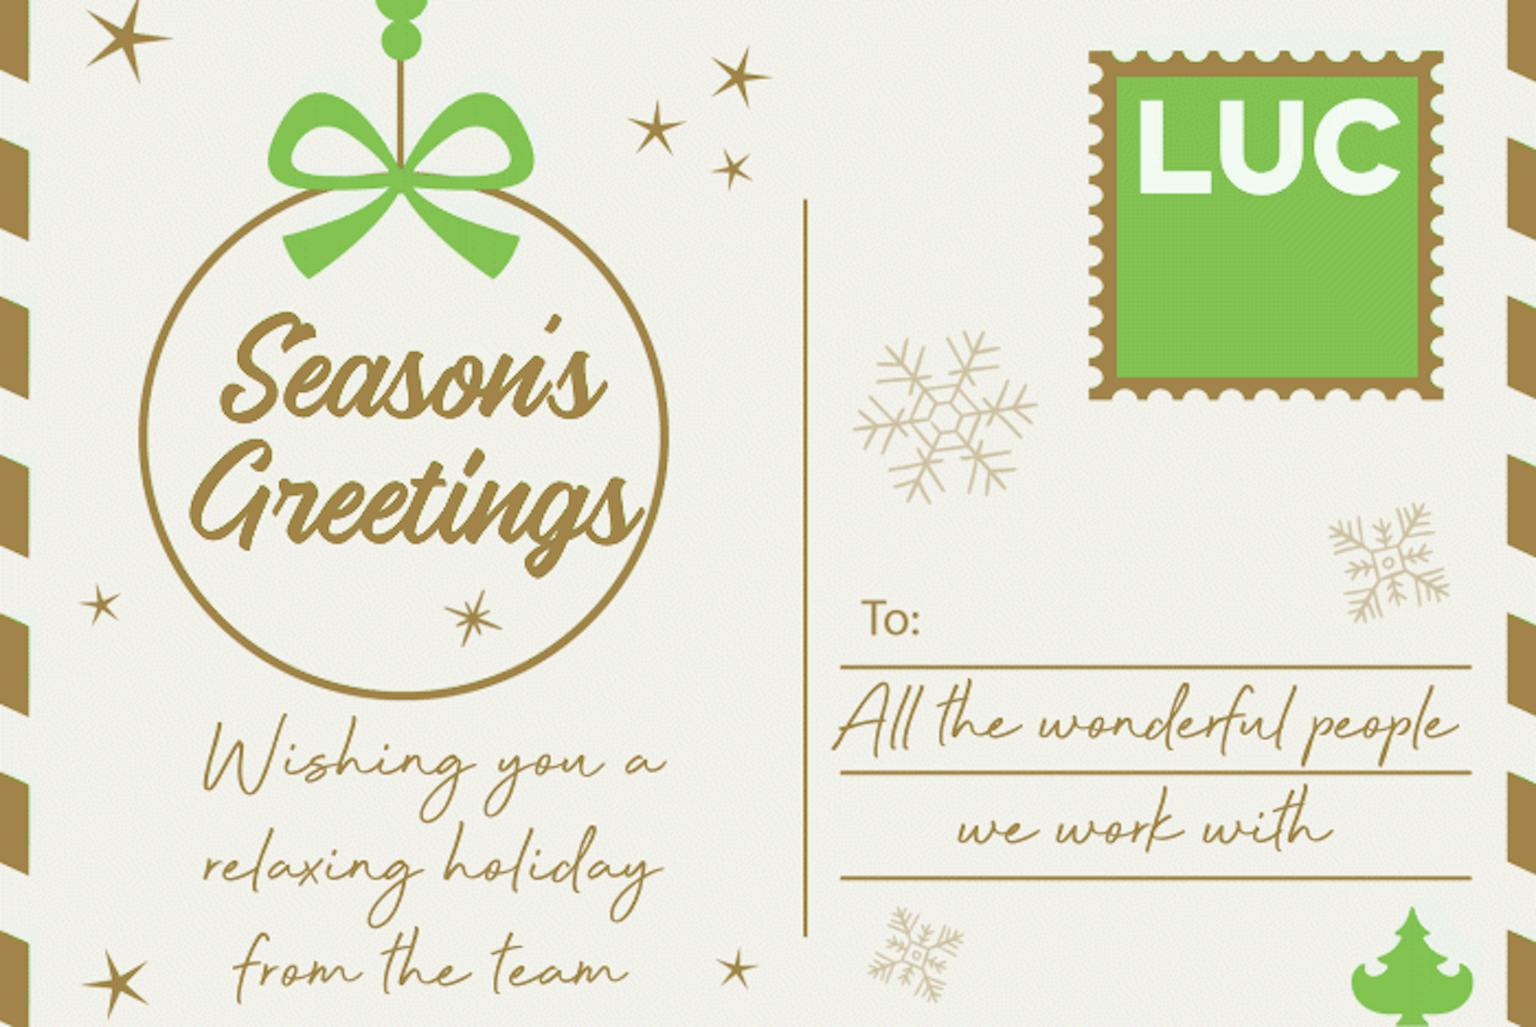 Season's Greetings from LUC